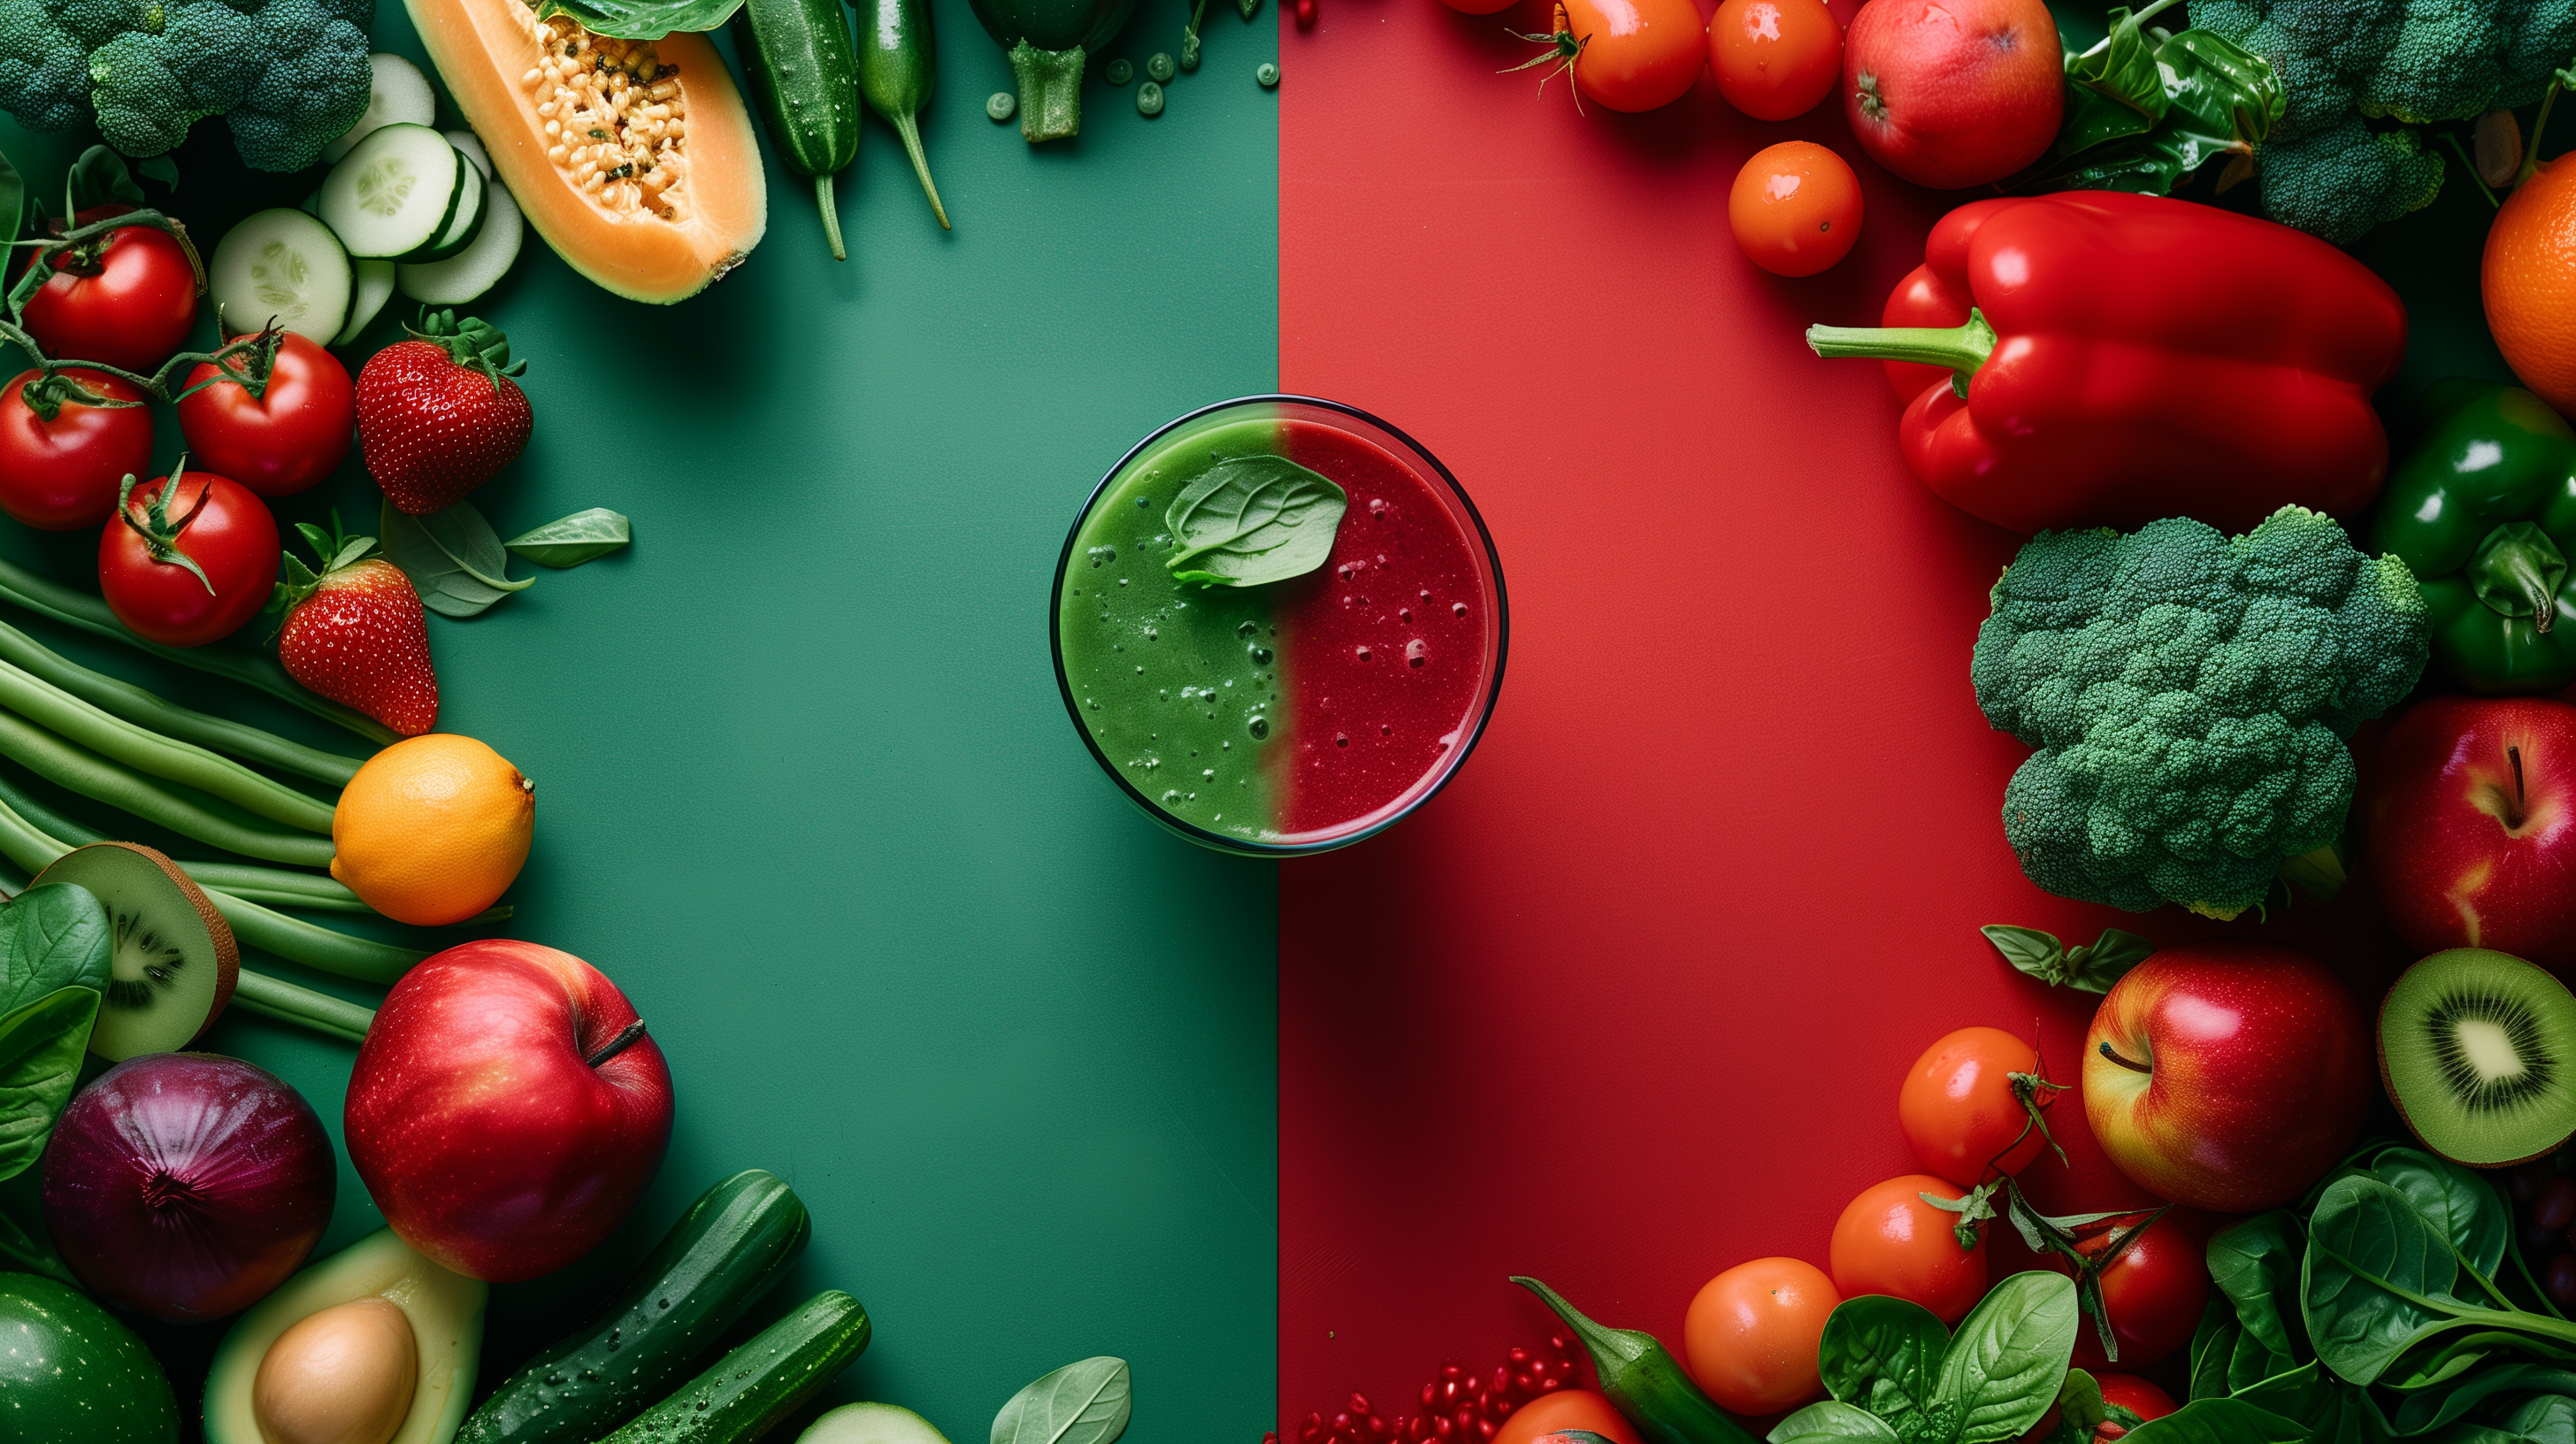 split background, half lush green, half deep red, showcasing a diverse array of fruits and vegetables on each side